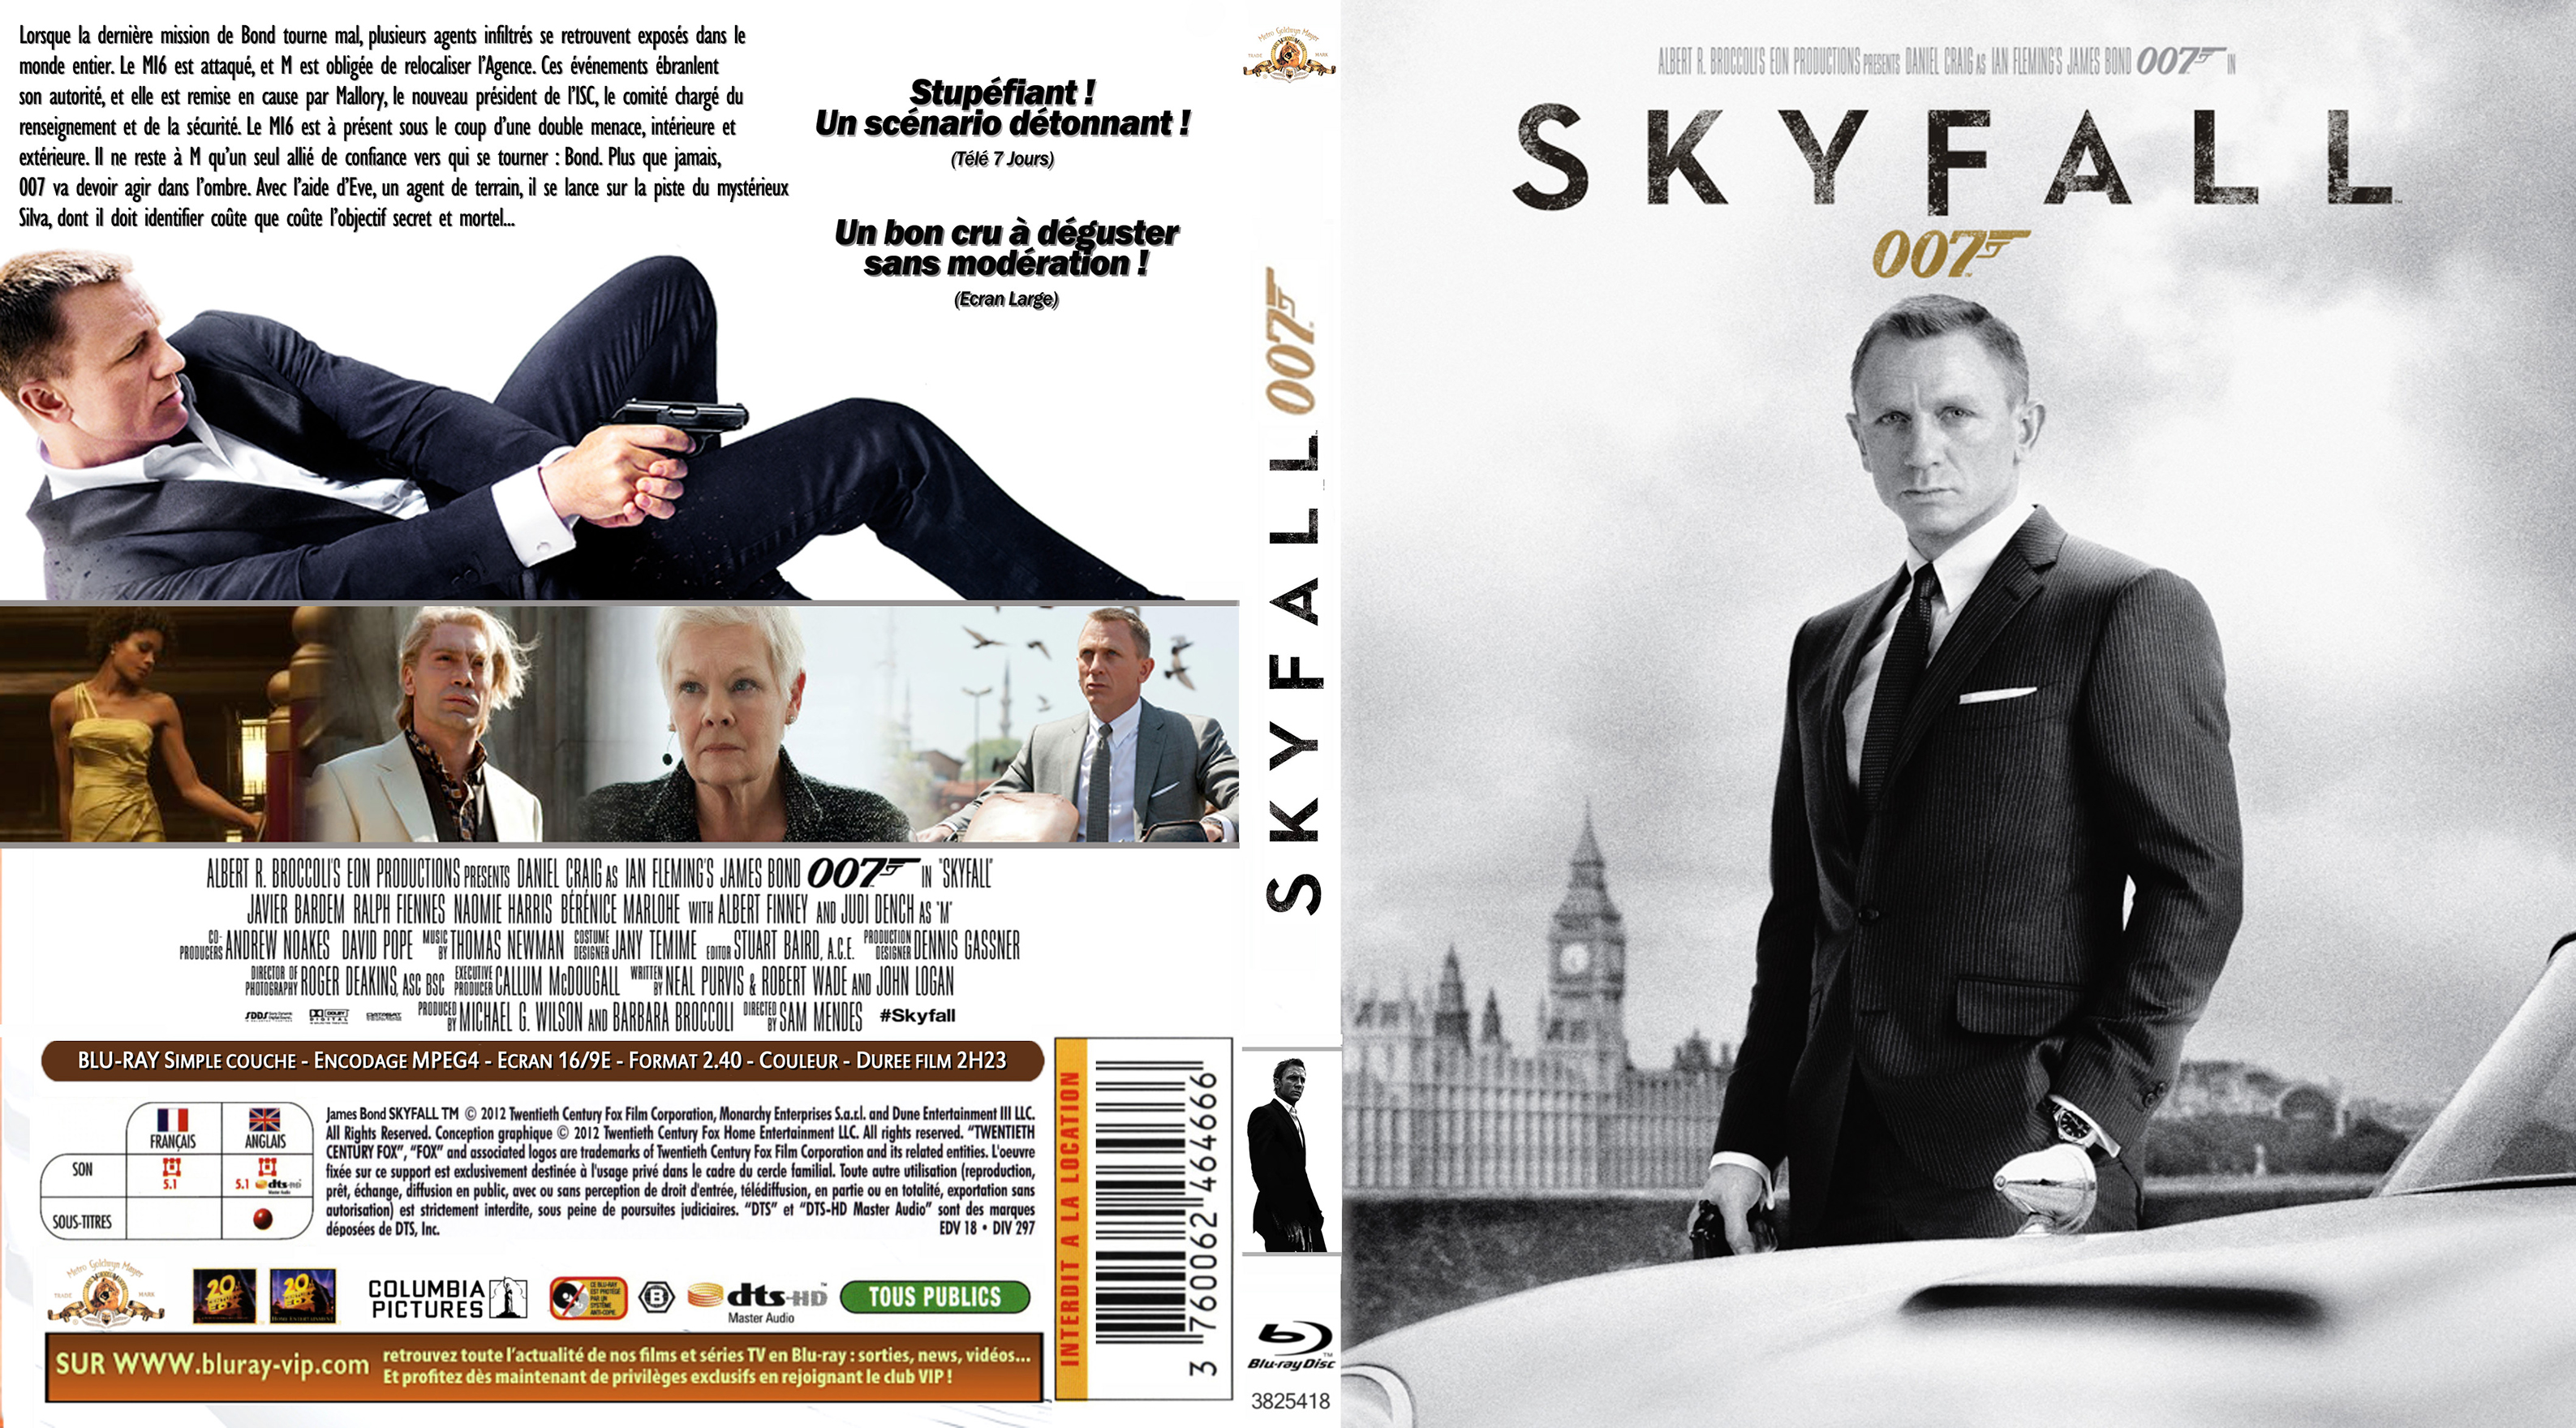 size: 3175 x 1760 pixels, filesize: 2.5 MB
 Skyfall Dvd Cover